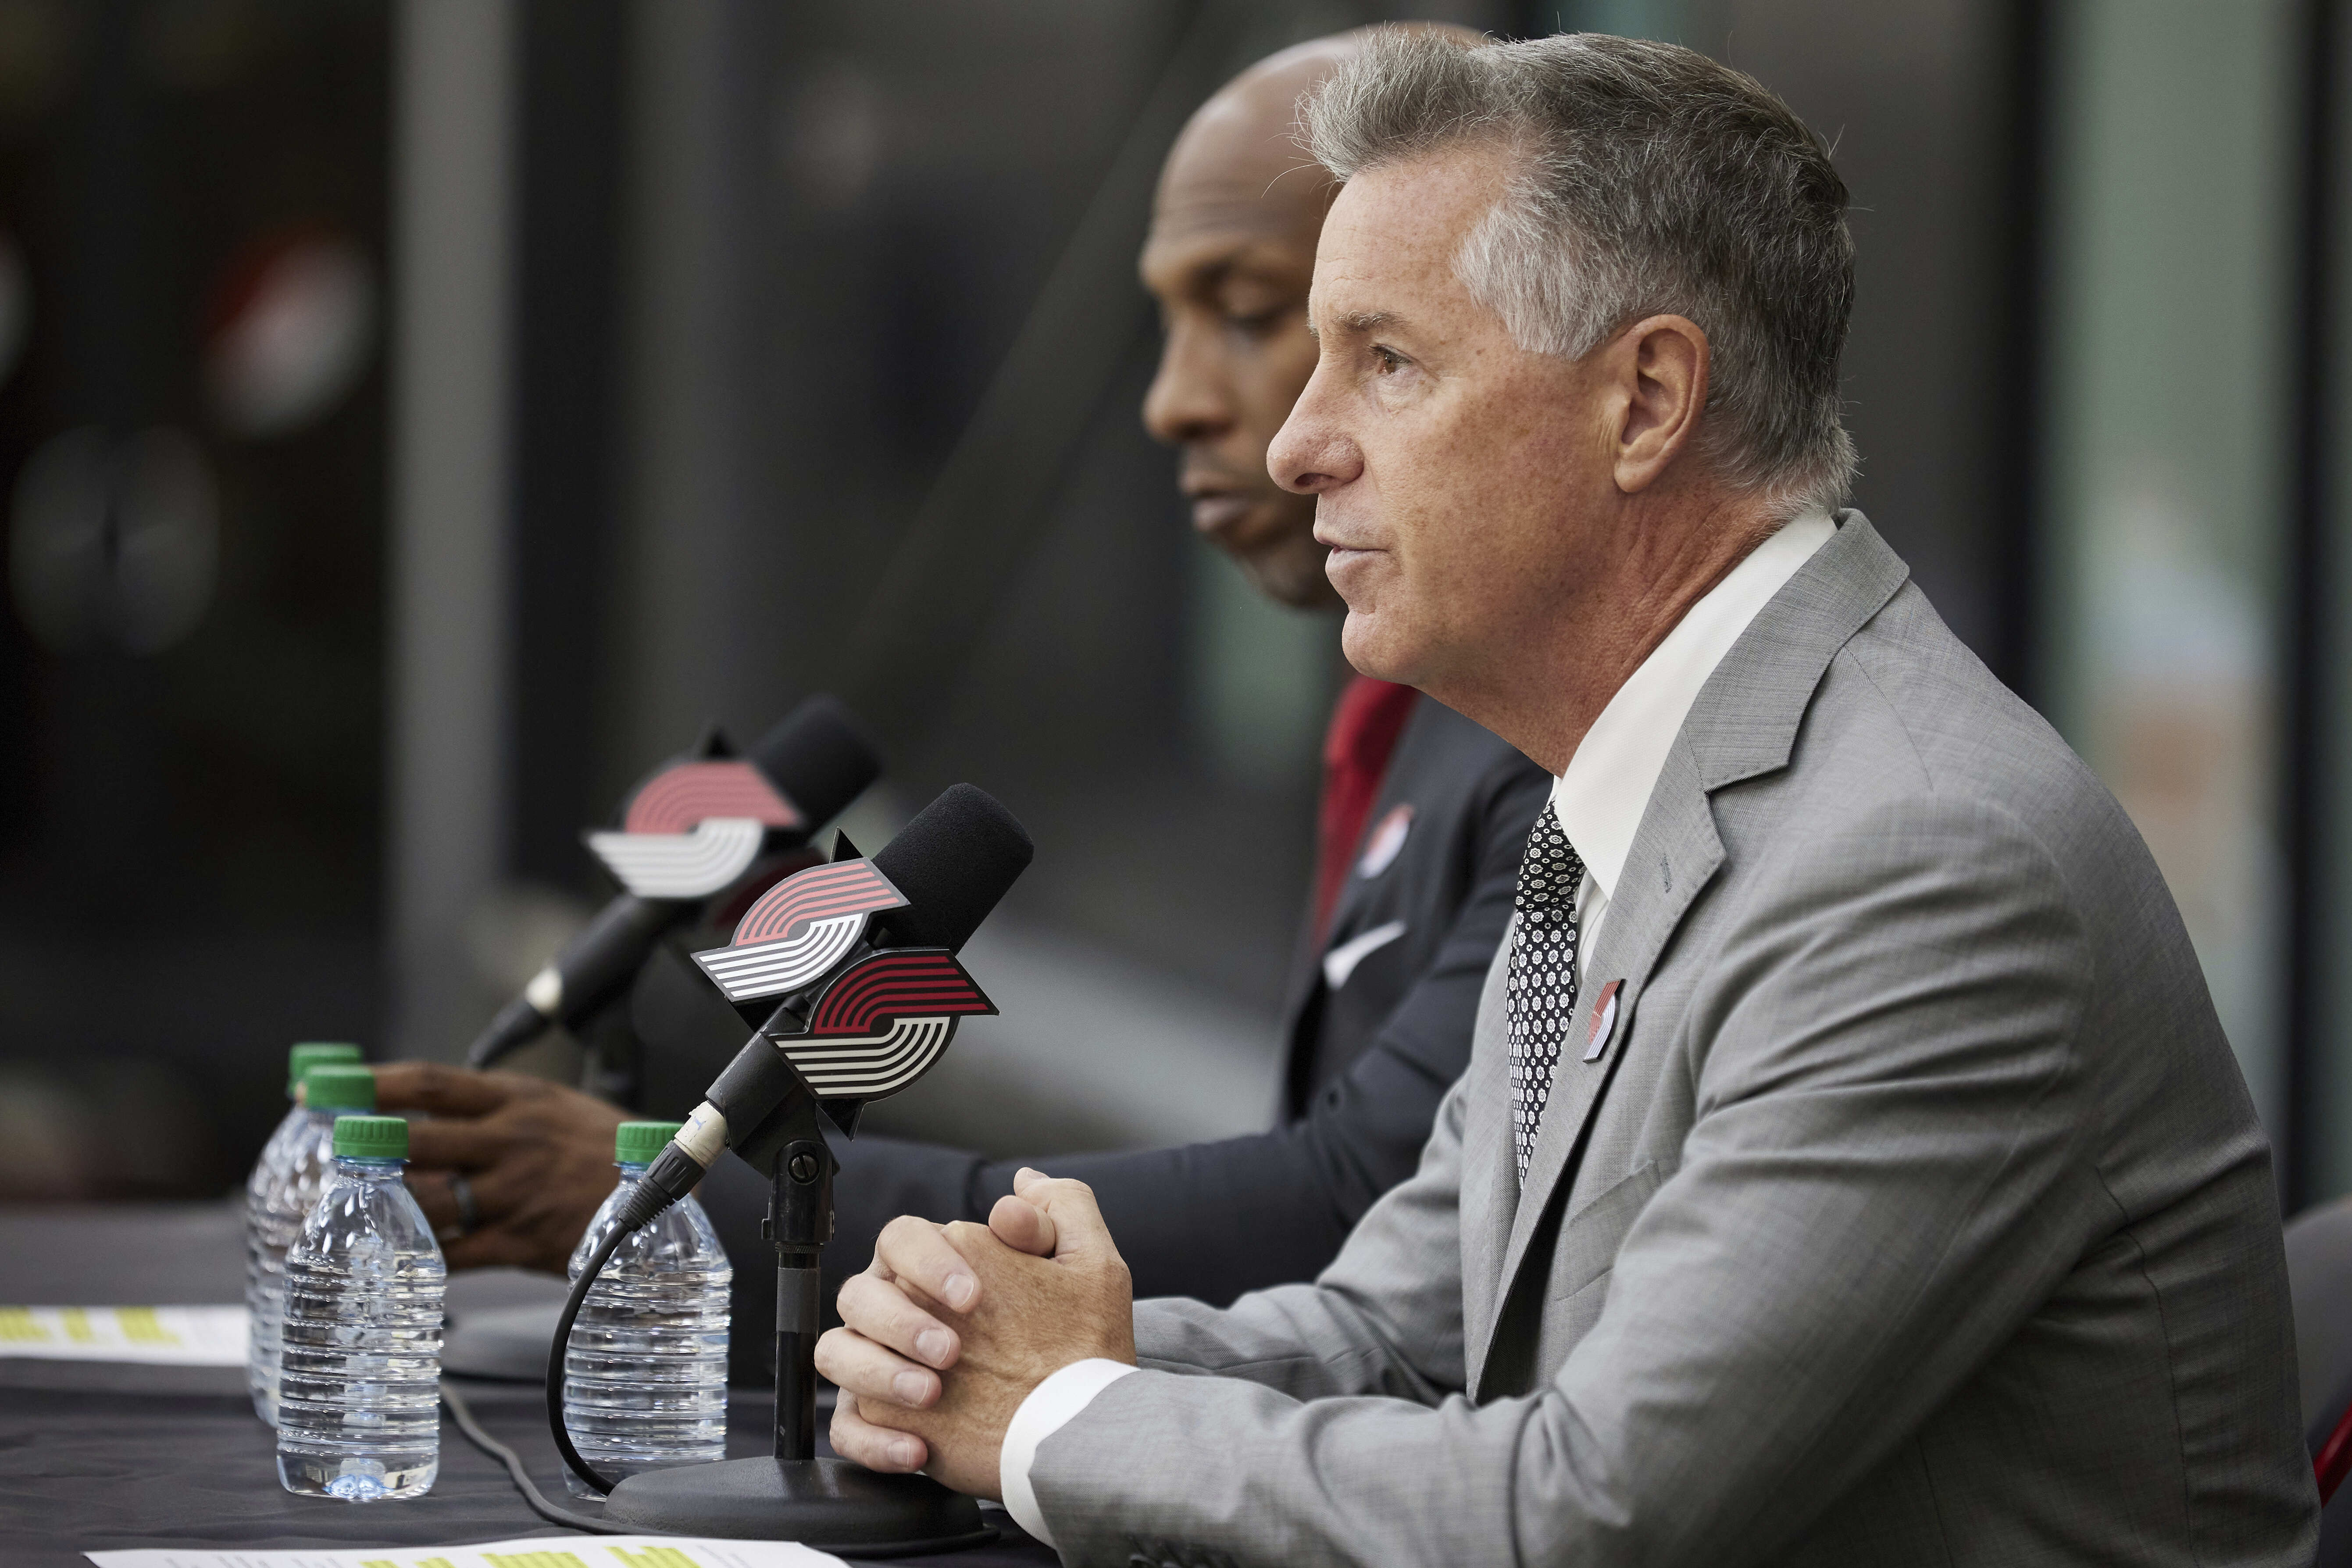 Portland Trail Blazers' rape investigation came together quickly, didn't  contact accuser - OPB